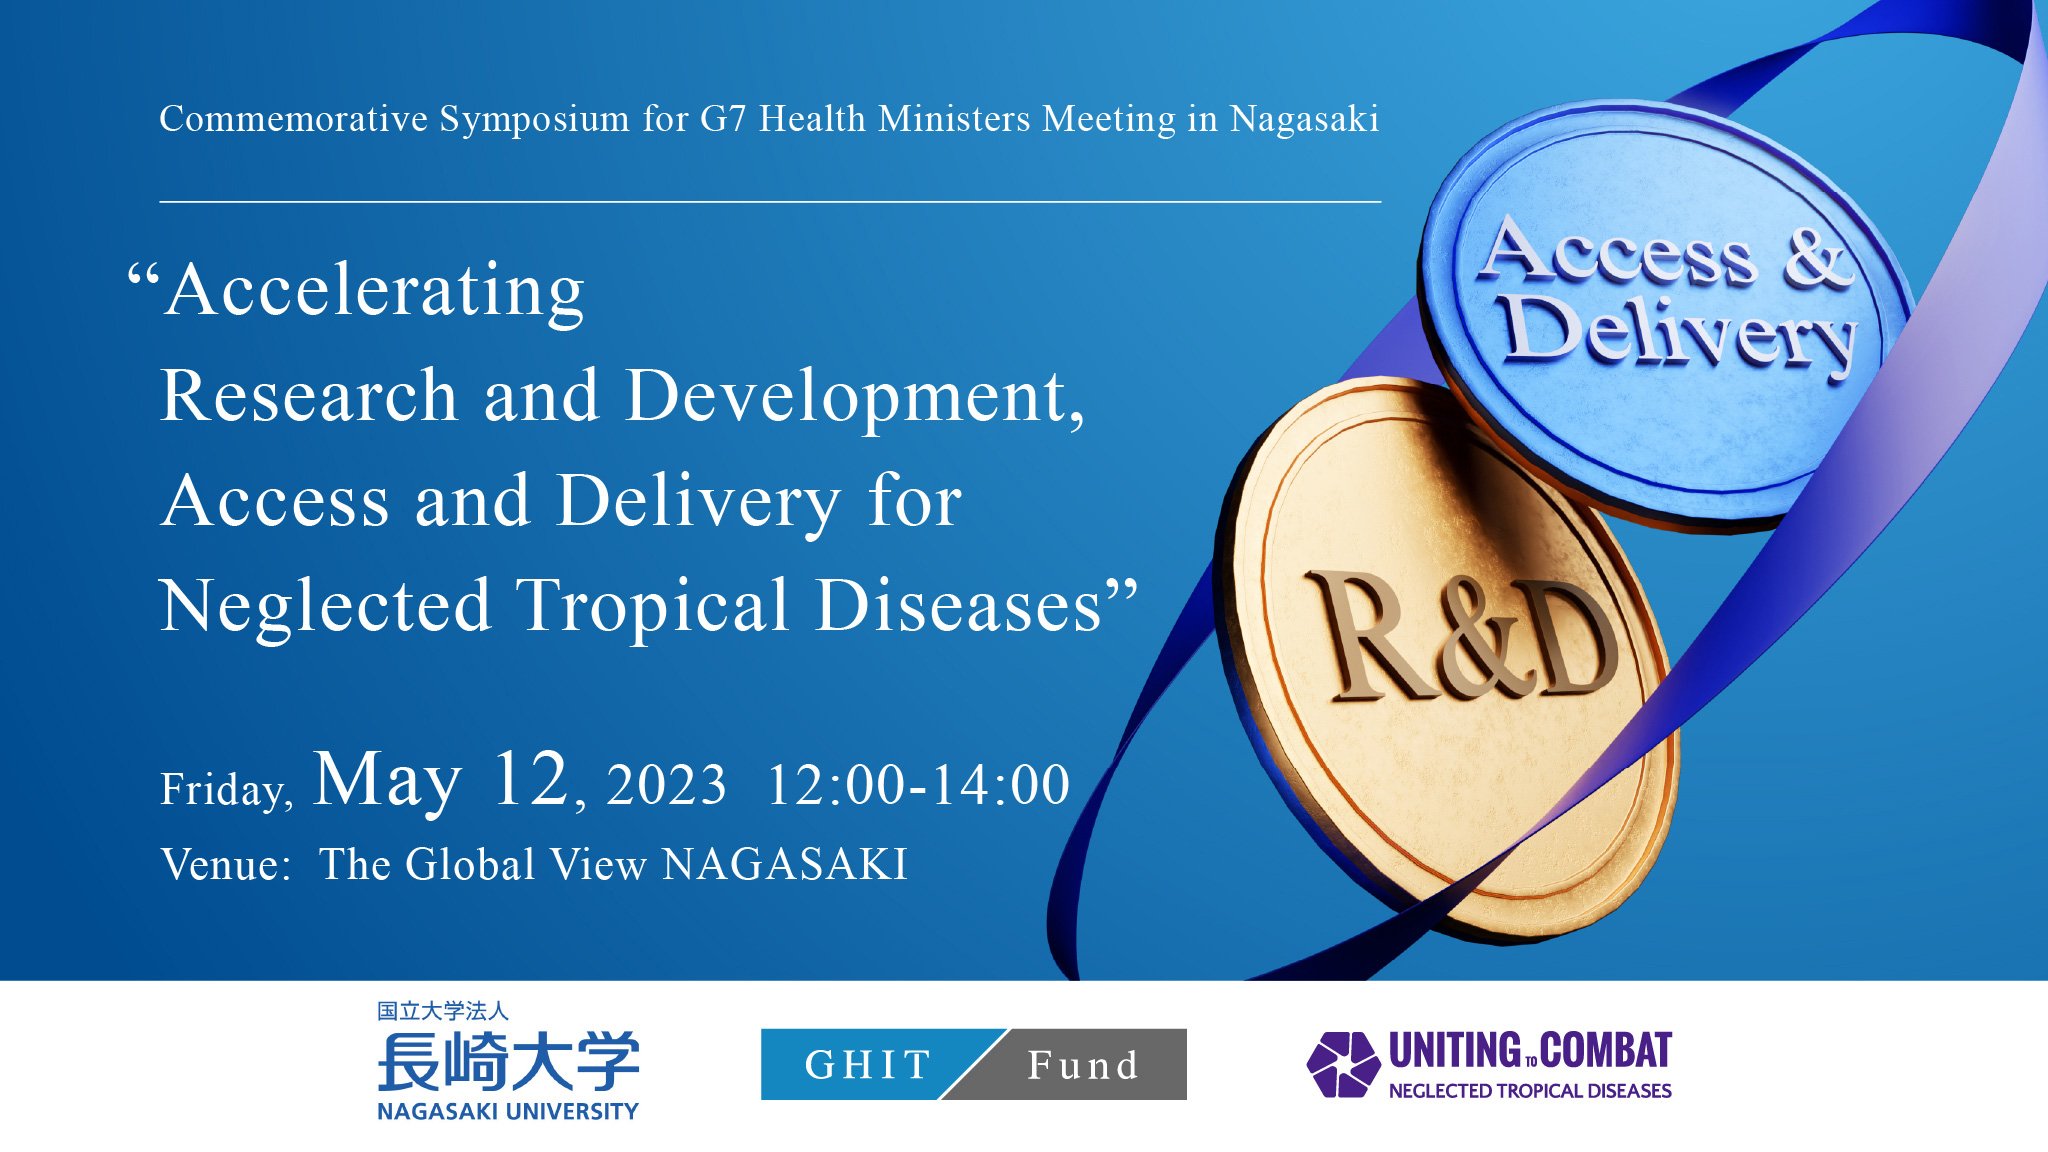 Commemorative Symposium for G7 Health Ministers Meeting in Nagasaki